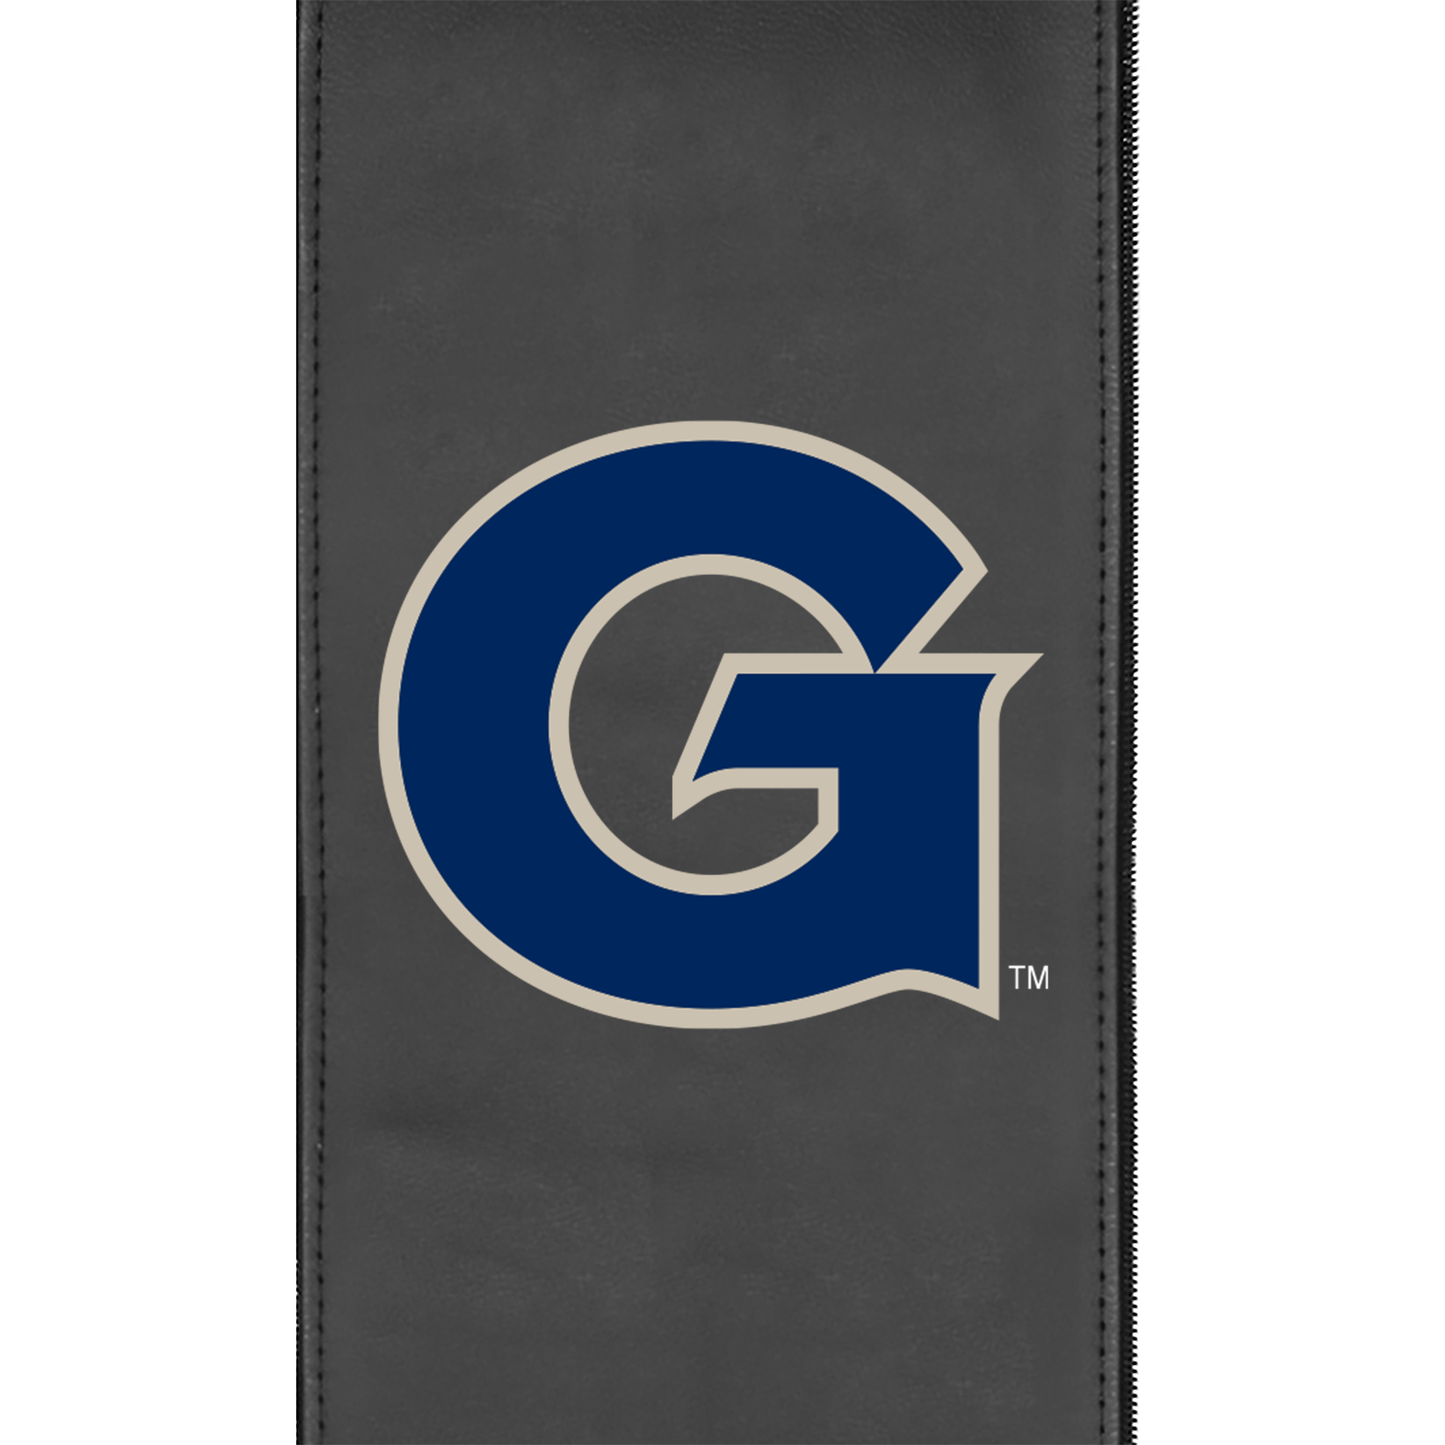 Silver Club Chair with Georgetown Hoyas Primary